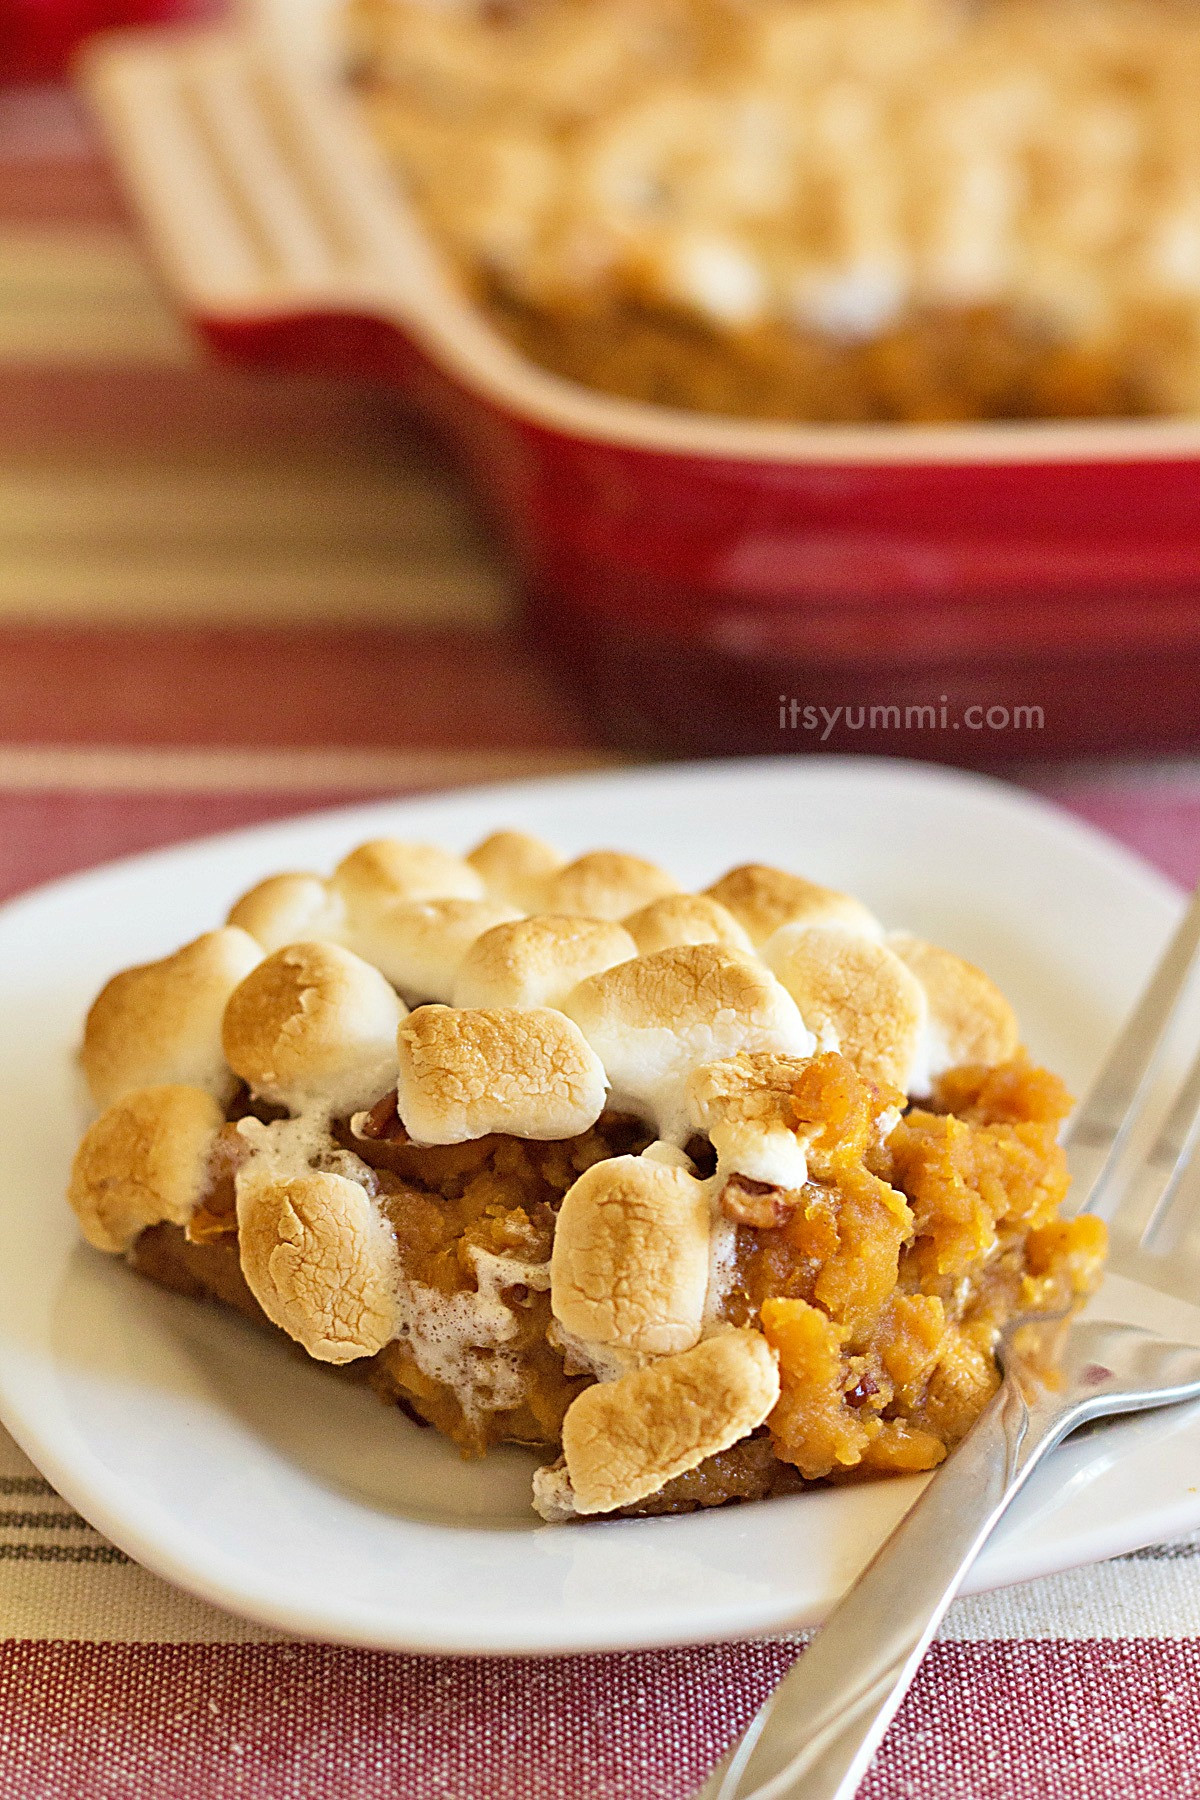 Canned Sweet Potato Casserole With Marshmallows
 Canned Sweet Potato Casserole with Marshmallows